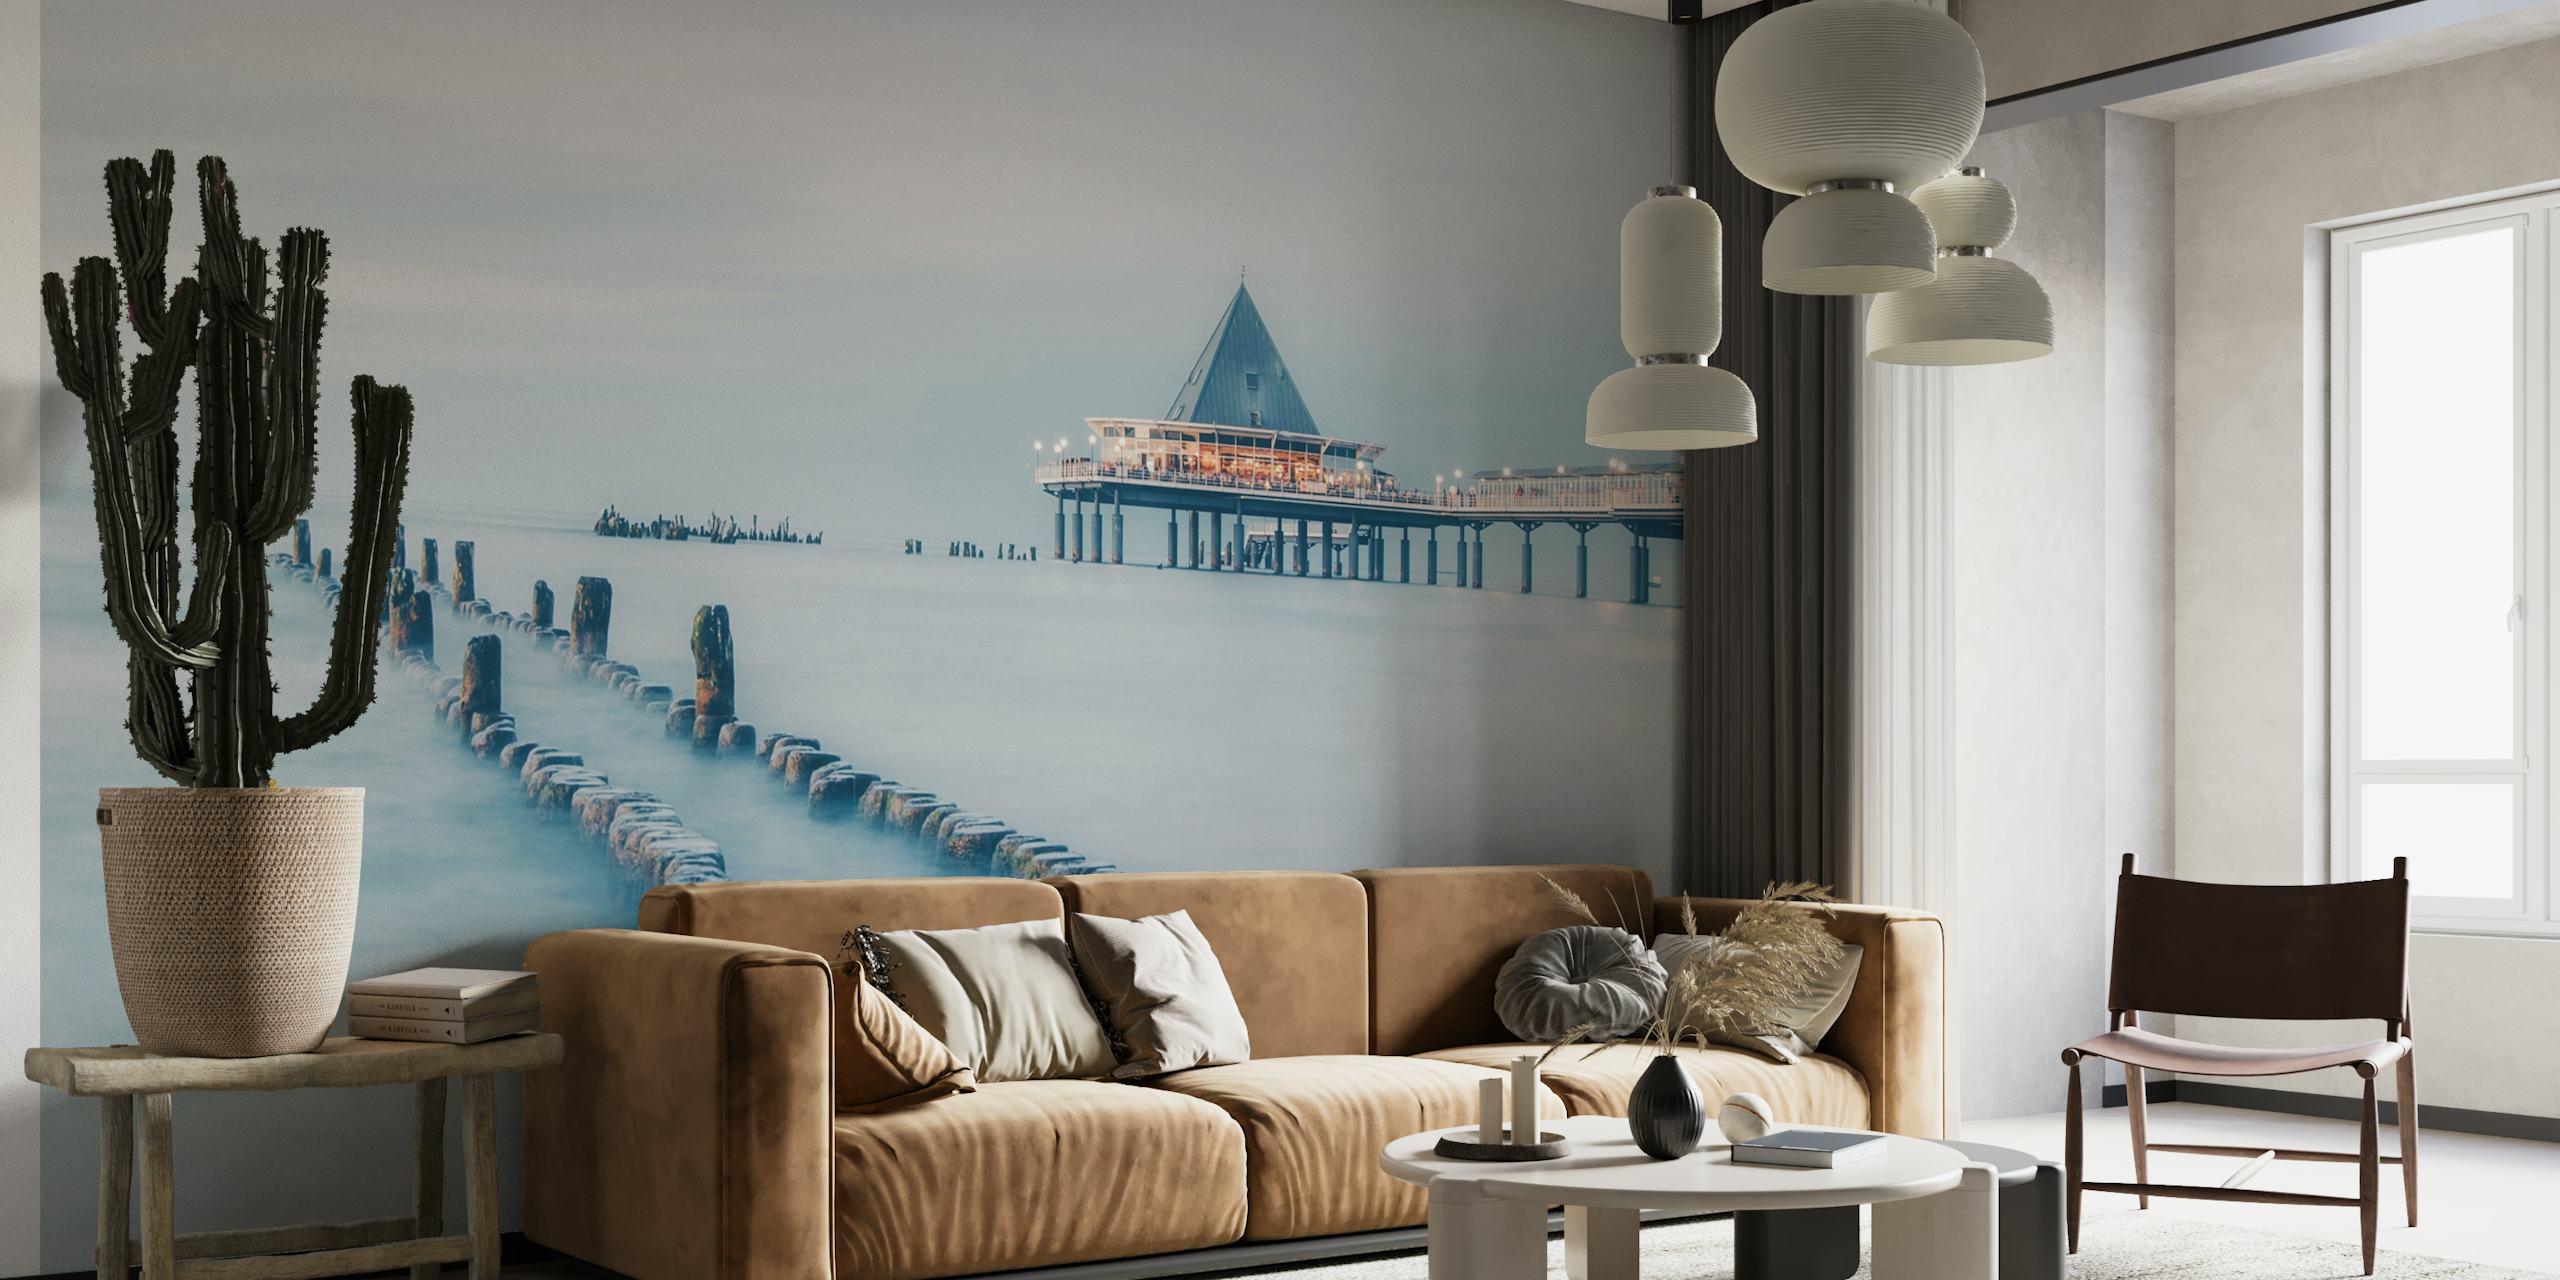 Pier Heringsdorf wall mural with misty seascape and dawn colors